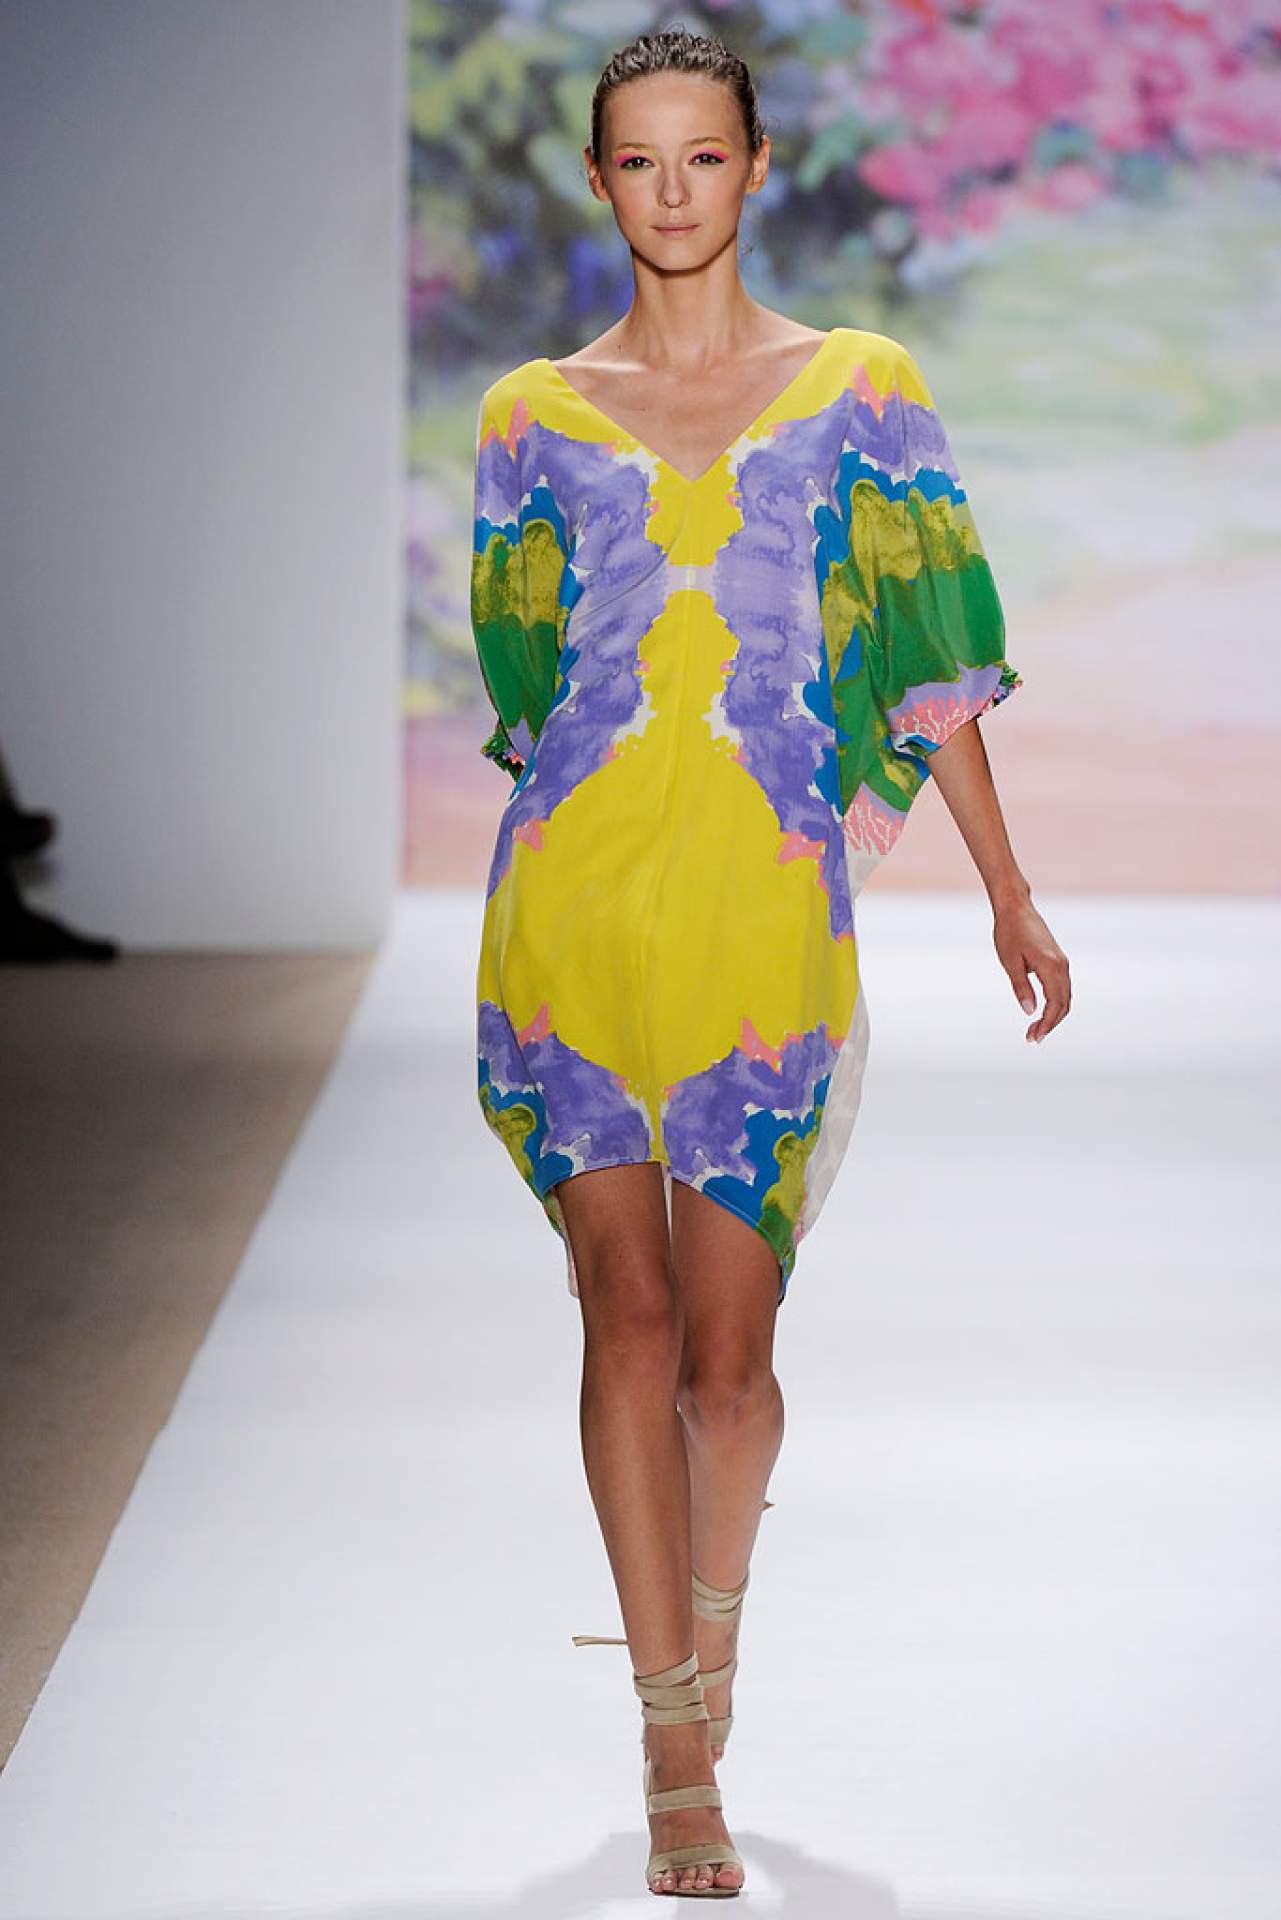 "Wear It Wet: Watercolor Inspired Fabric In Fashion" by Brittany Lingard